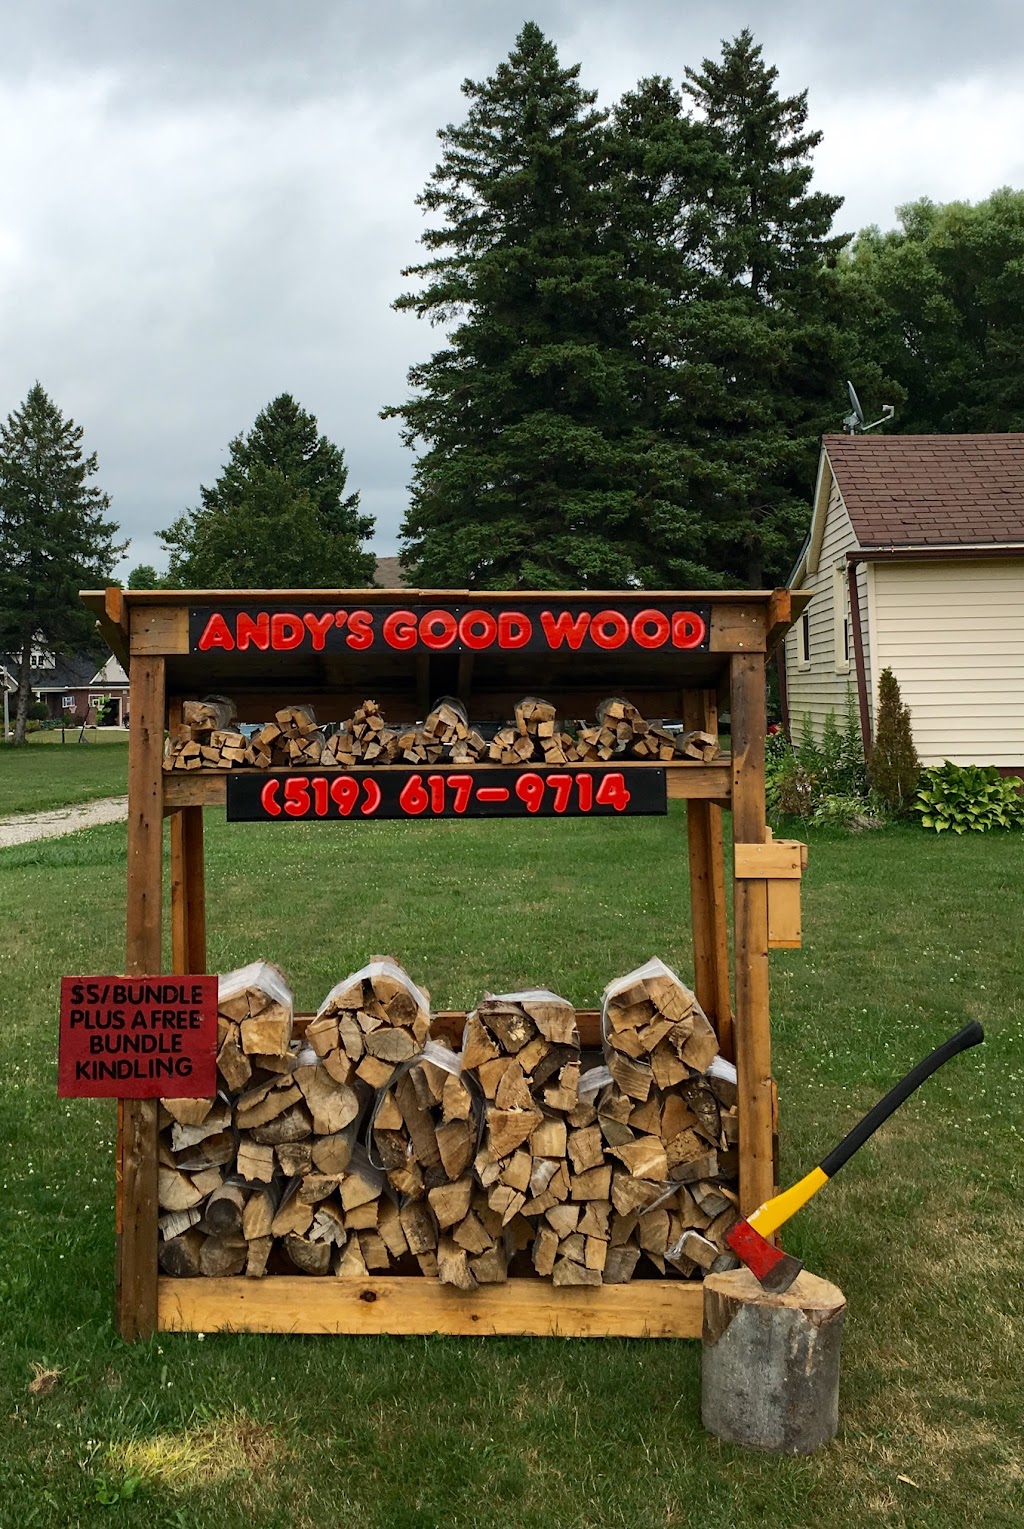 Andys Good Wood | 9680 Belmont Rd, St Thomas, ON N5P 3S7, Canada | Phone: (519) 617-9714